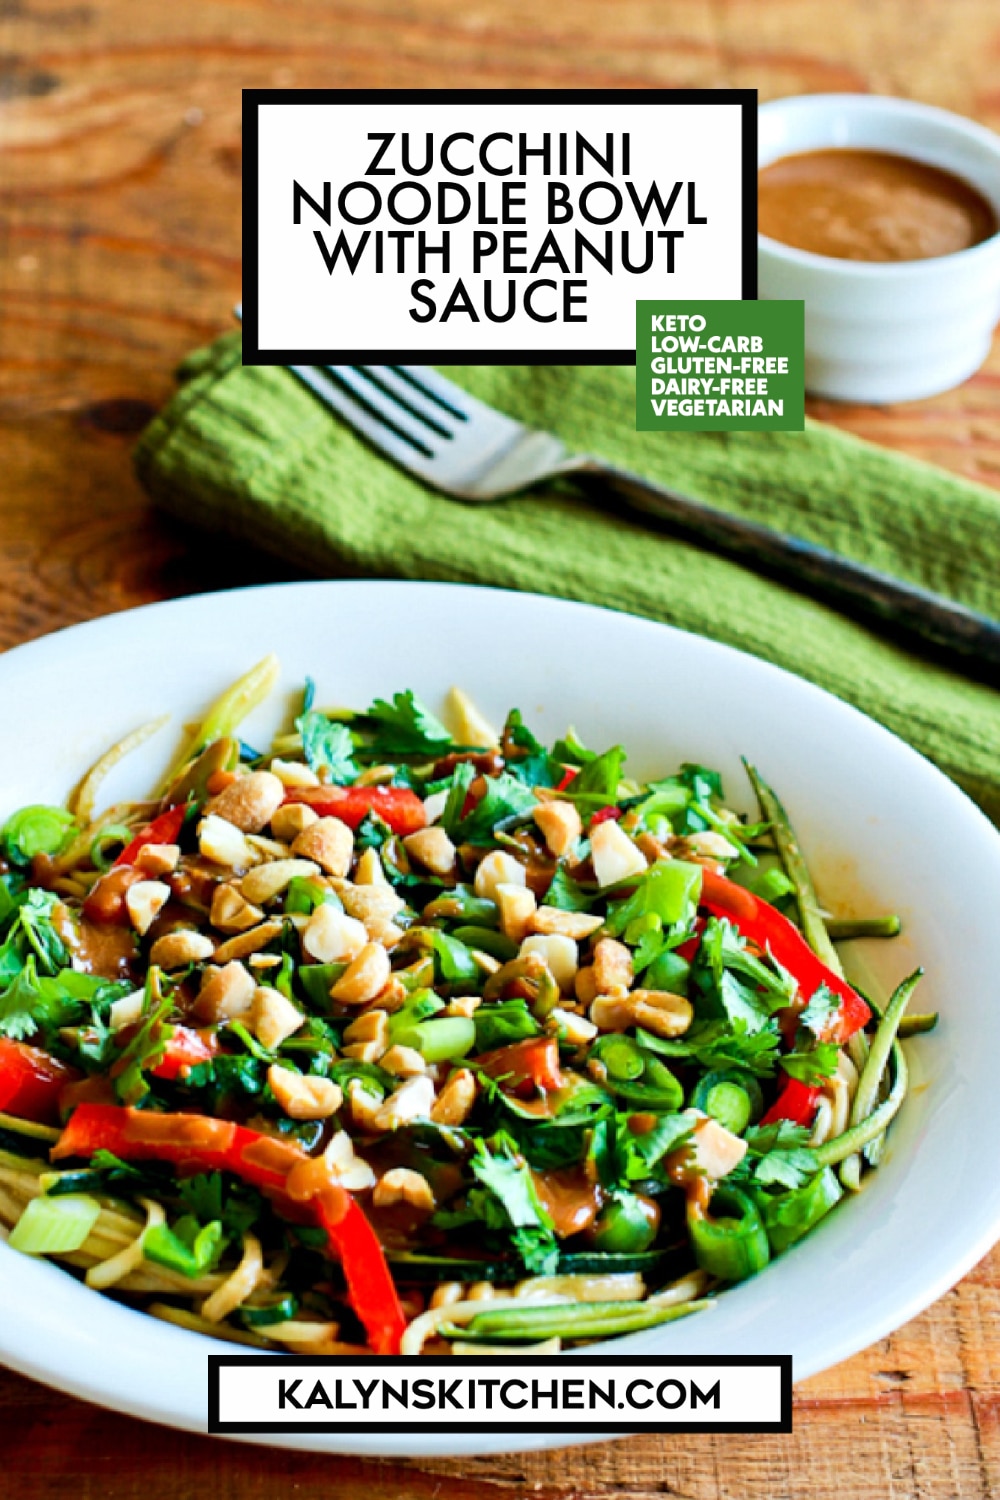 Pinterest image of Zucchini Noodle Bowl with Peanut Sauce